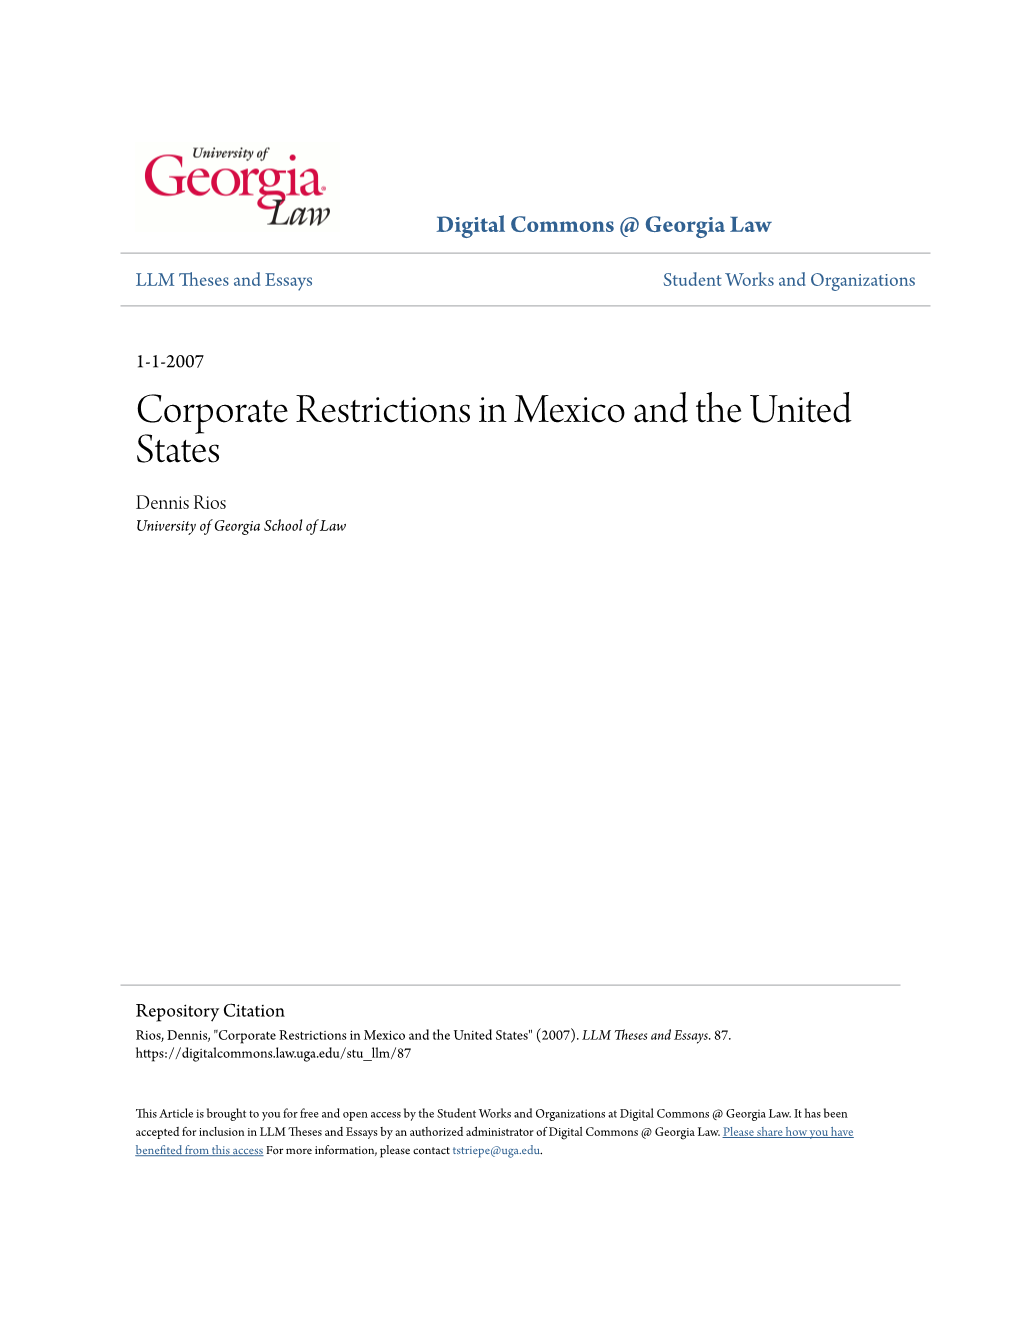 Corporate Restrictions in Mexico and the United States Dennis Rios University of Georgia School of Law